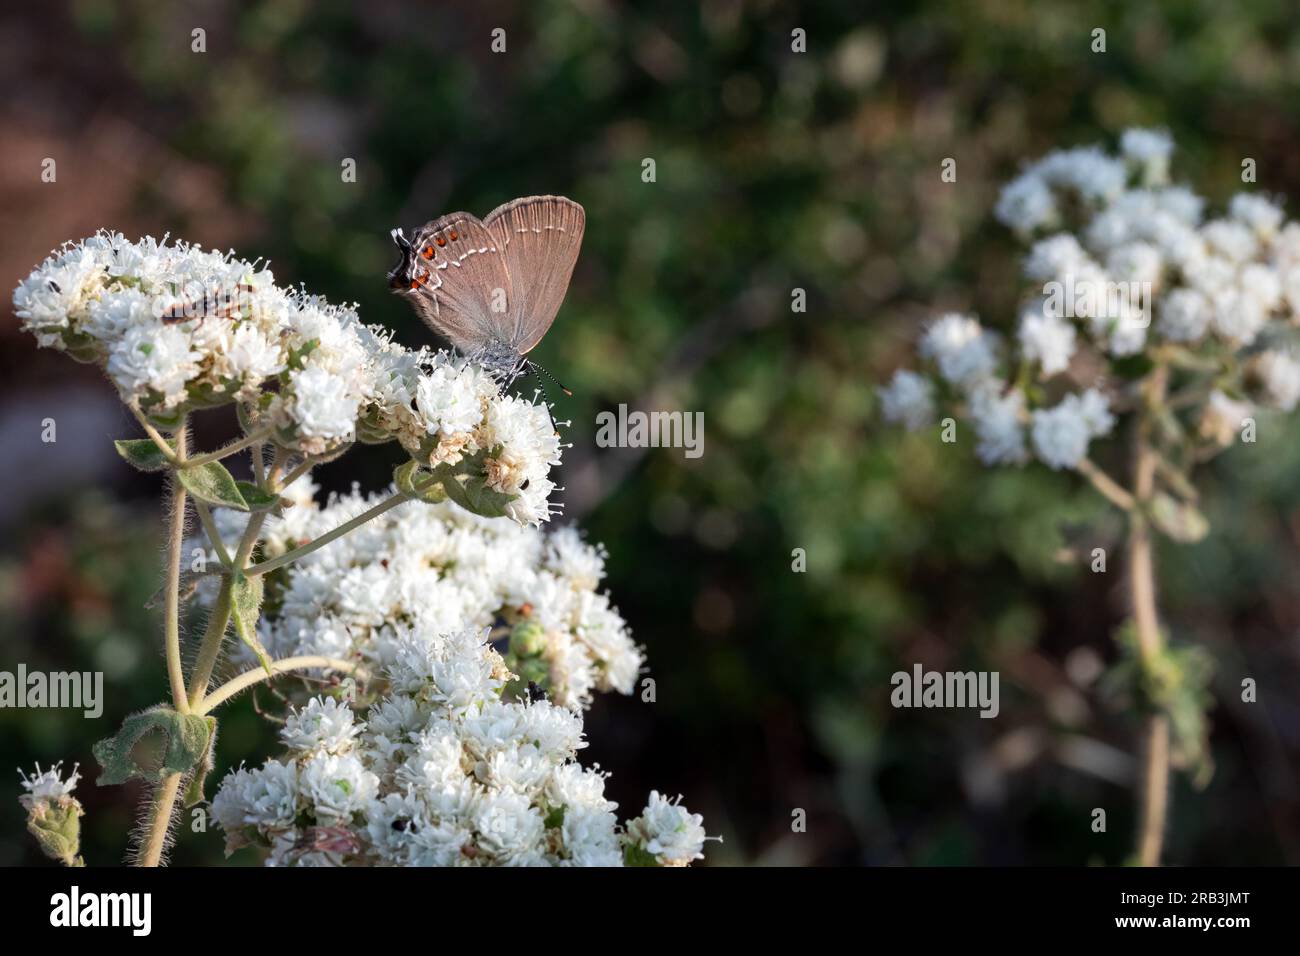 Satyrium acadica, the Acadian hairstreak, is a butterfly of the family Lycaenidae. Stock Photo